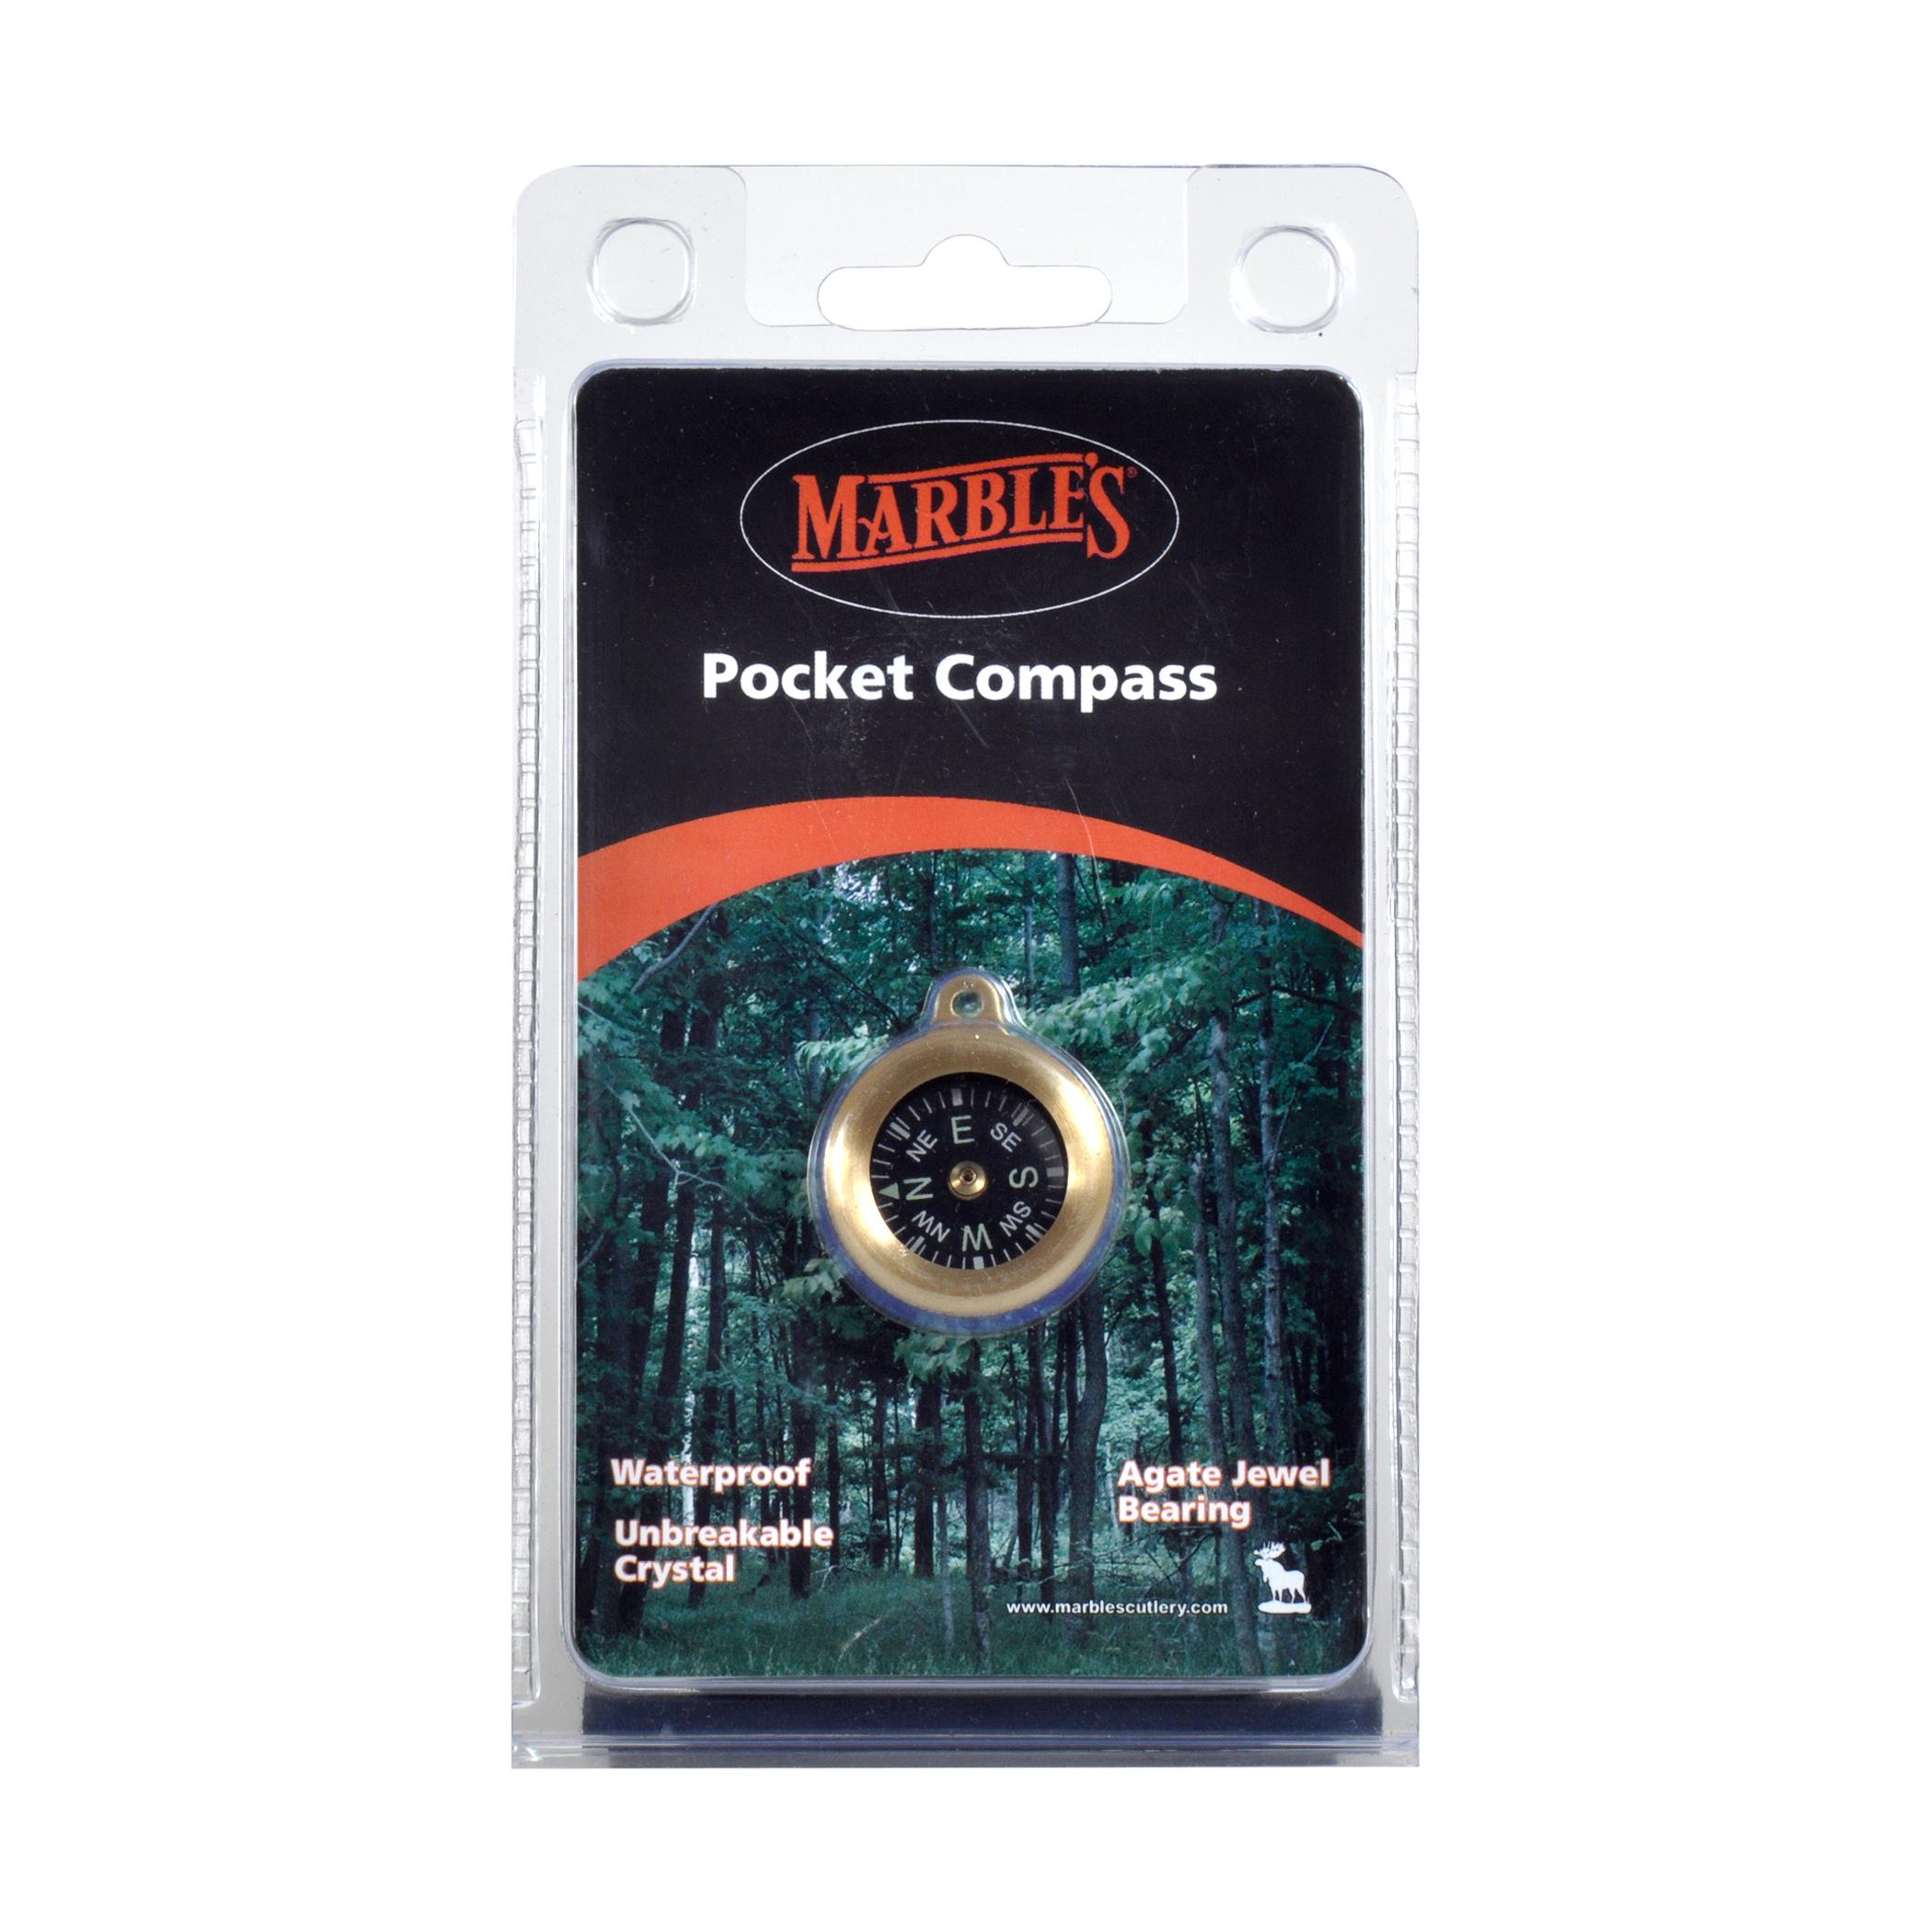 Marbles Pocket Compass. 